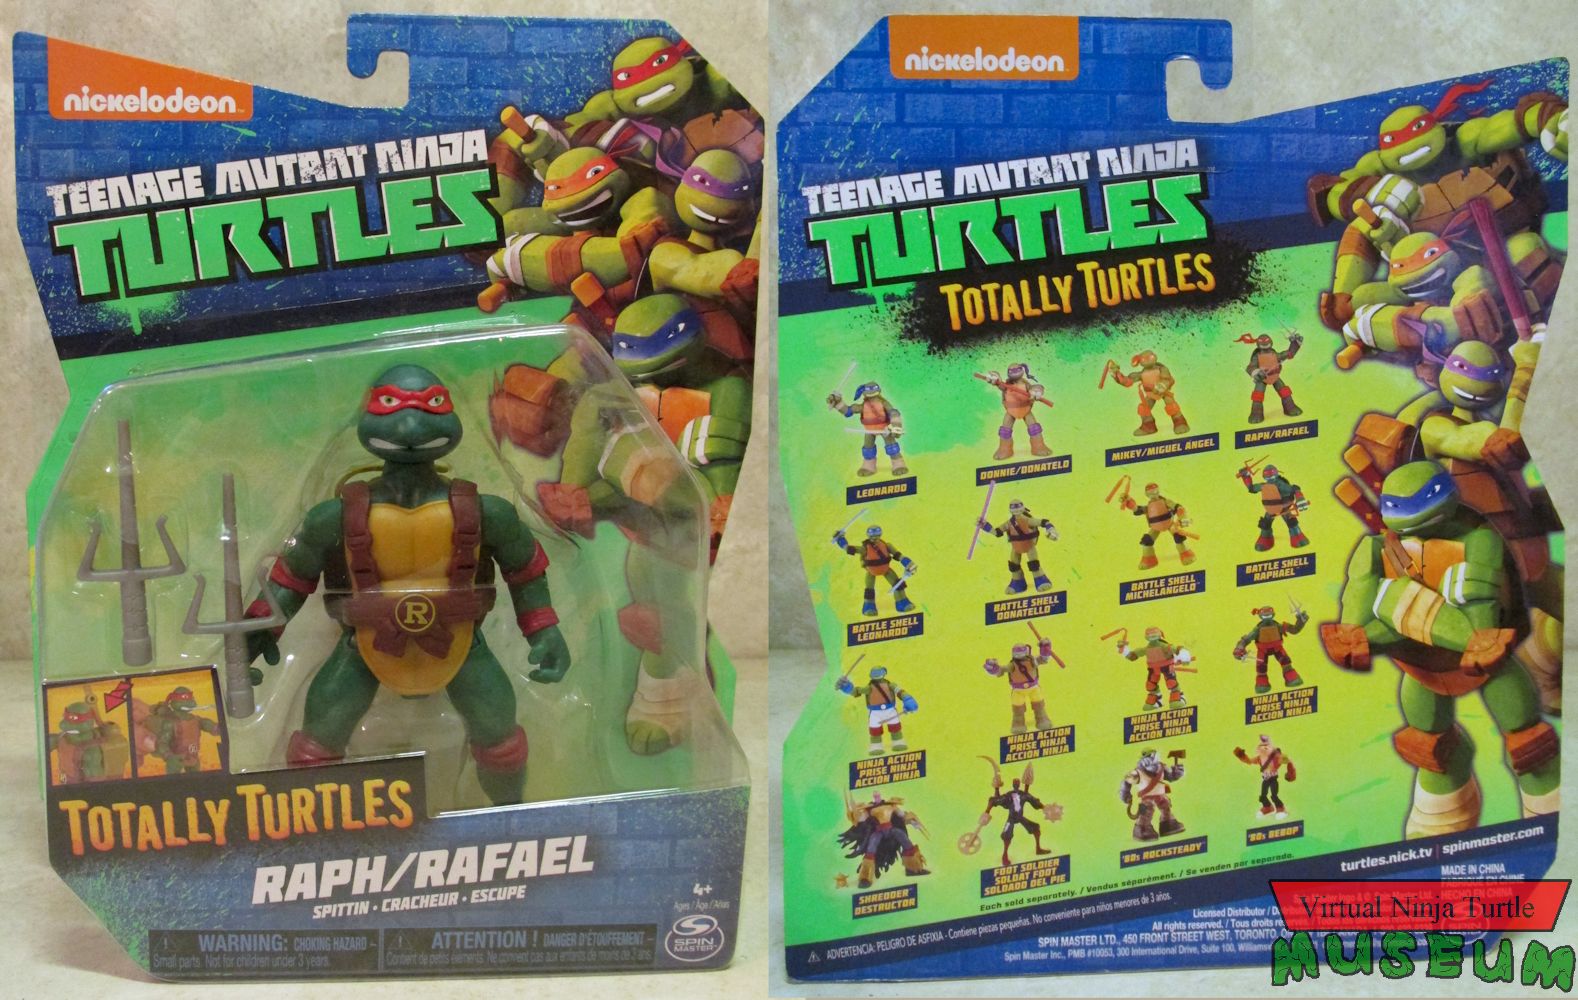 Totally Turtles Spinmaster card front and back